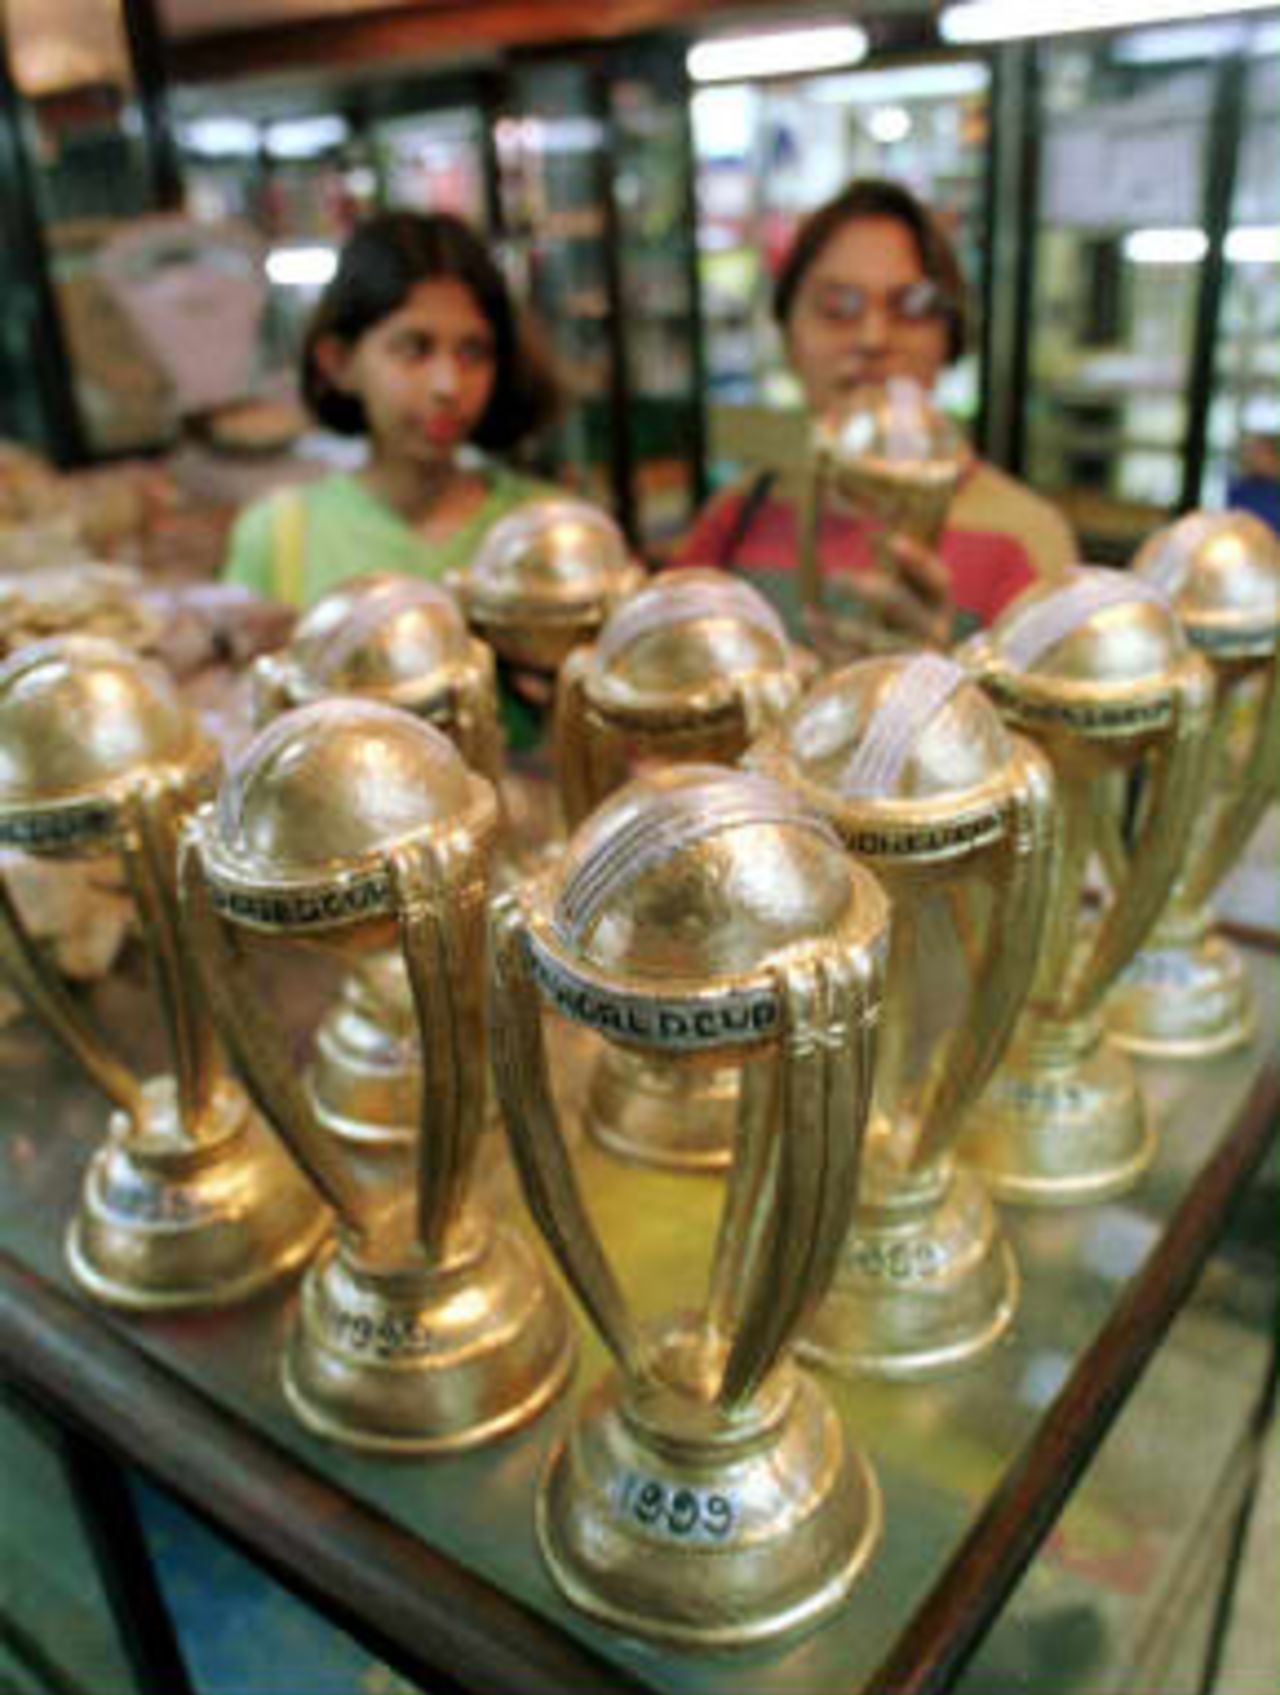 Miniature replicas of the cricket World Cup trophy made of papier mache are sold for 60 rupees each (1.50 USD) in a shop in Calcutta 09 June 1999.  After India's victory over arch-rival Pakistan in their World Cup cricket match in England 08 June, Calcuttans have thronged to buy World Cup souvenirs in hopes of an India victory in the championships